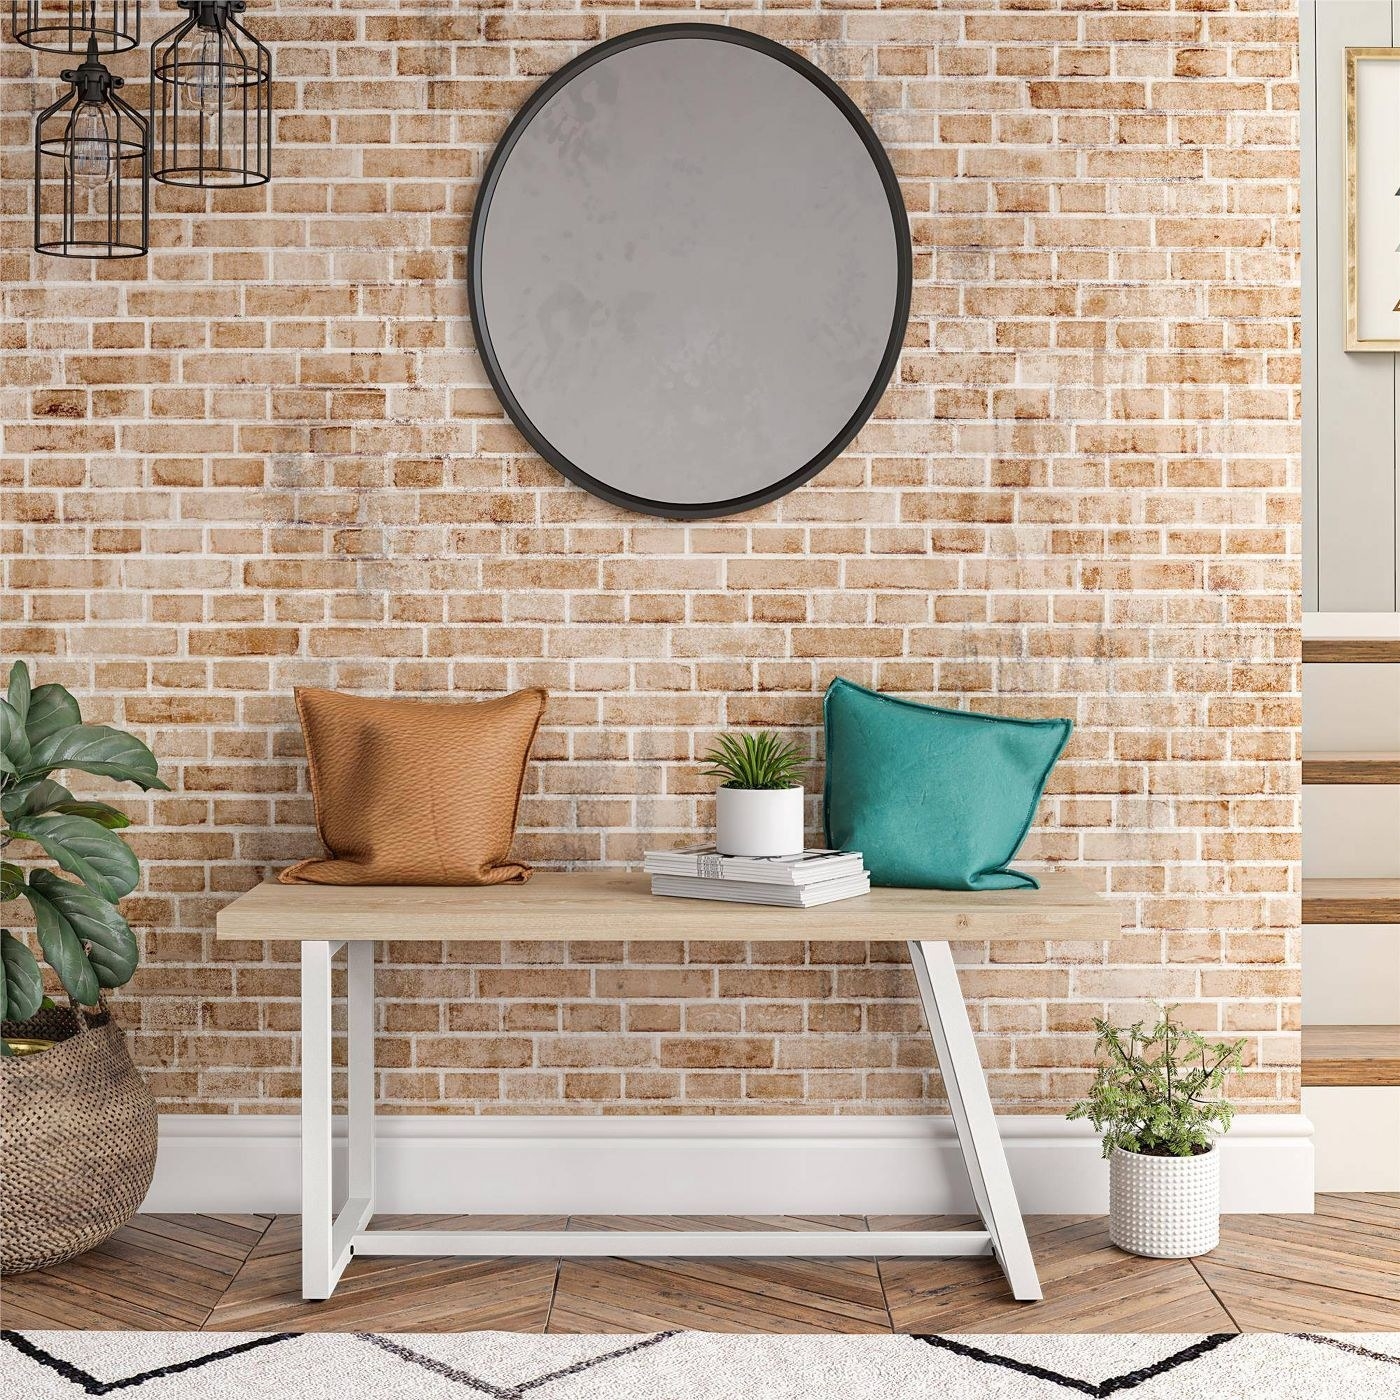 asymmetrical wood bench with white metal legs against a brick wall